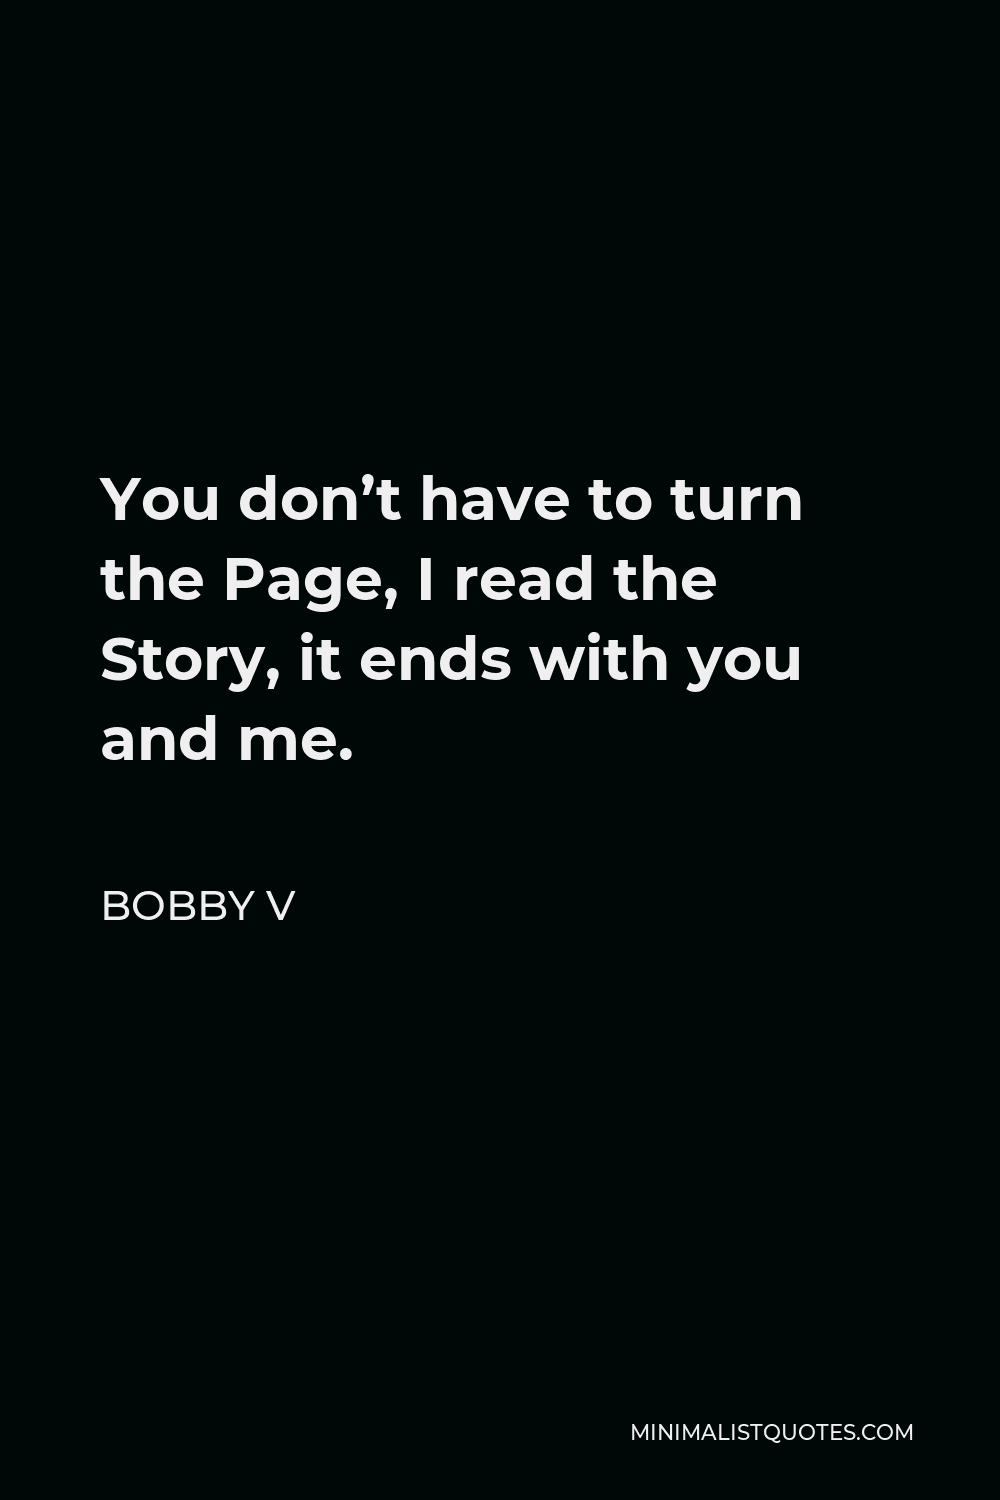 Bobby V Quote - You don’t have to turn the Page, I read the Story, it ends with you and me.